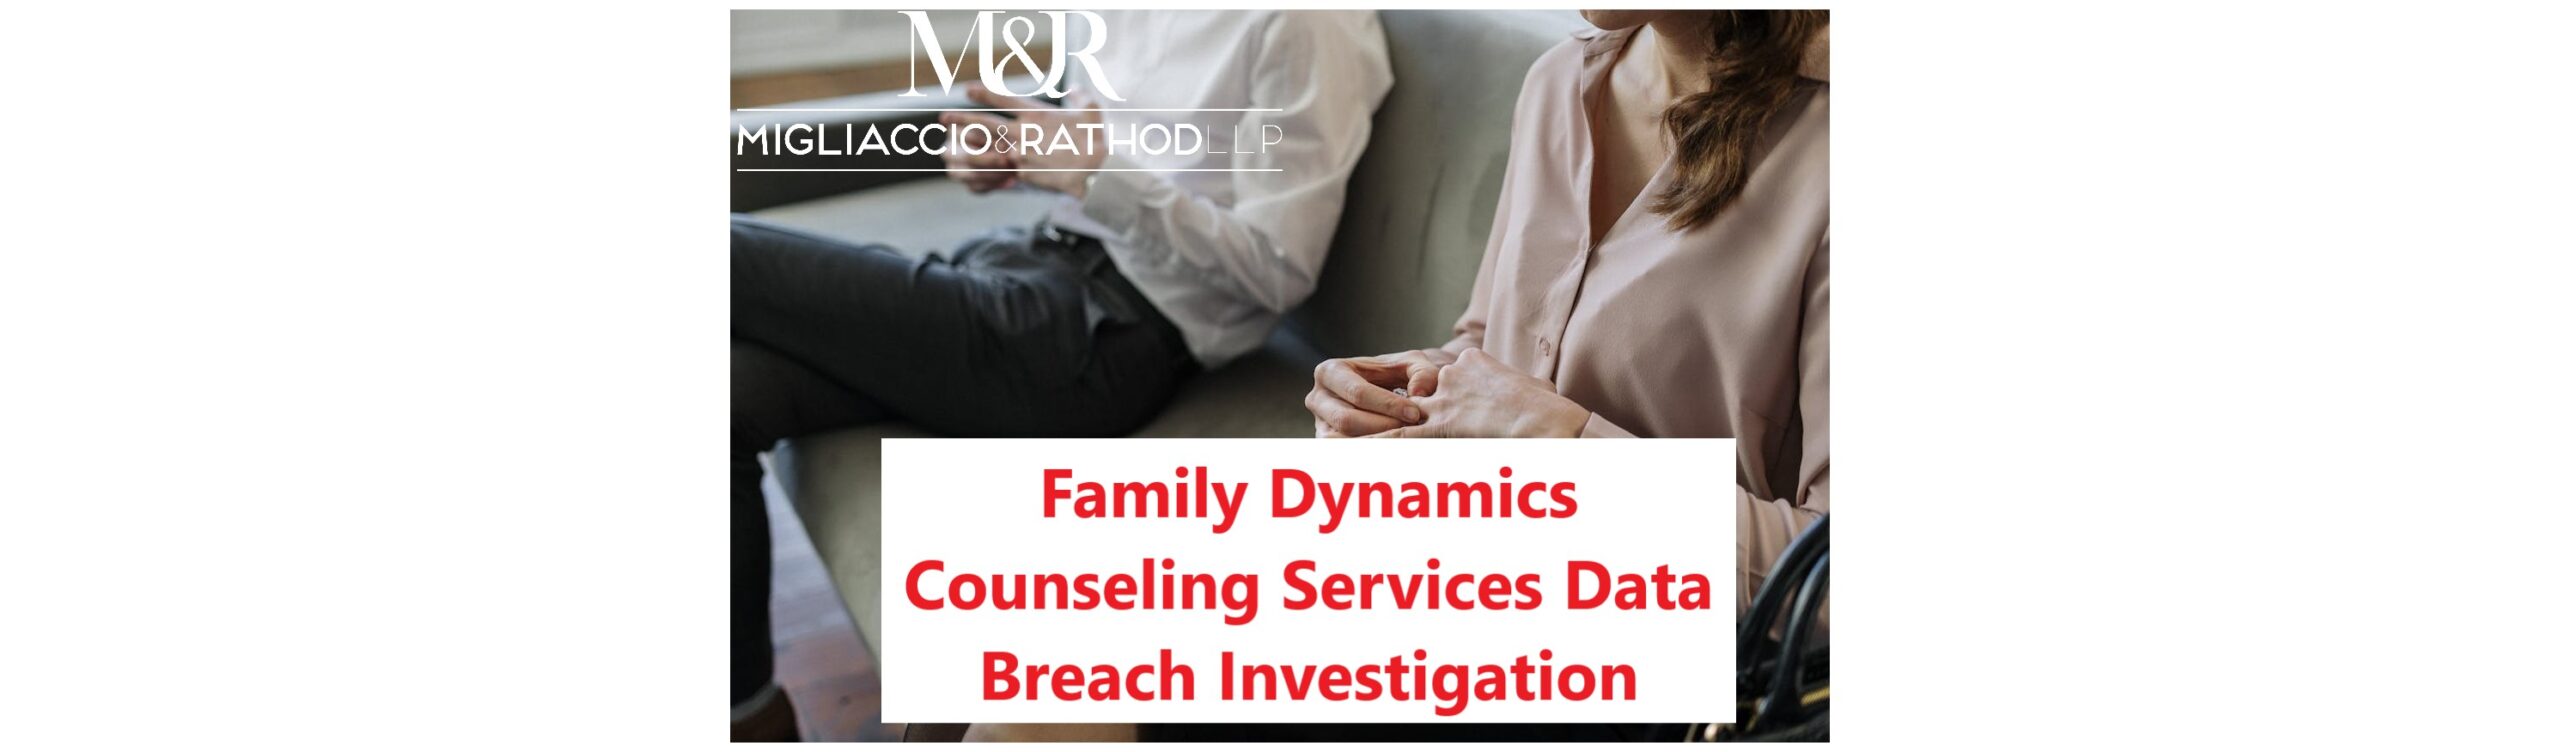 Family Dynamics Counseling Services Data Breach Investigation